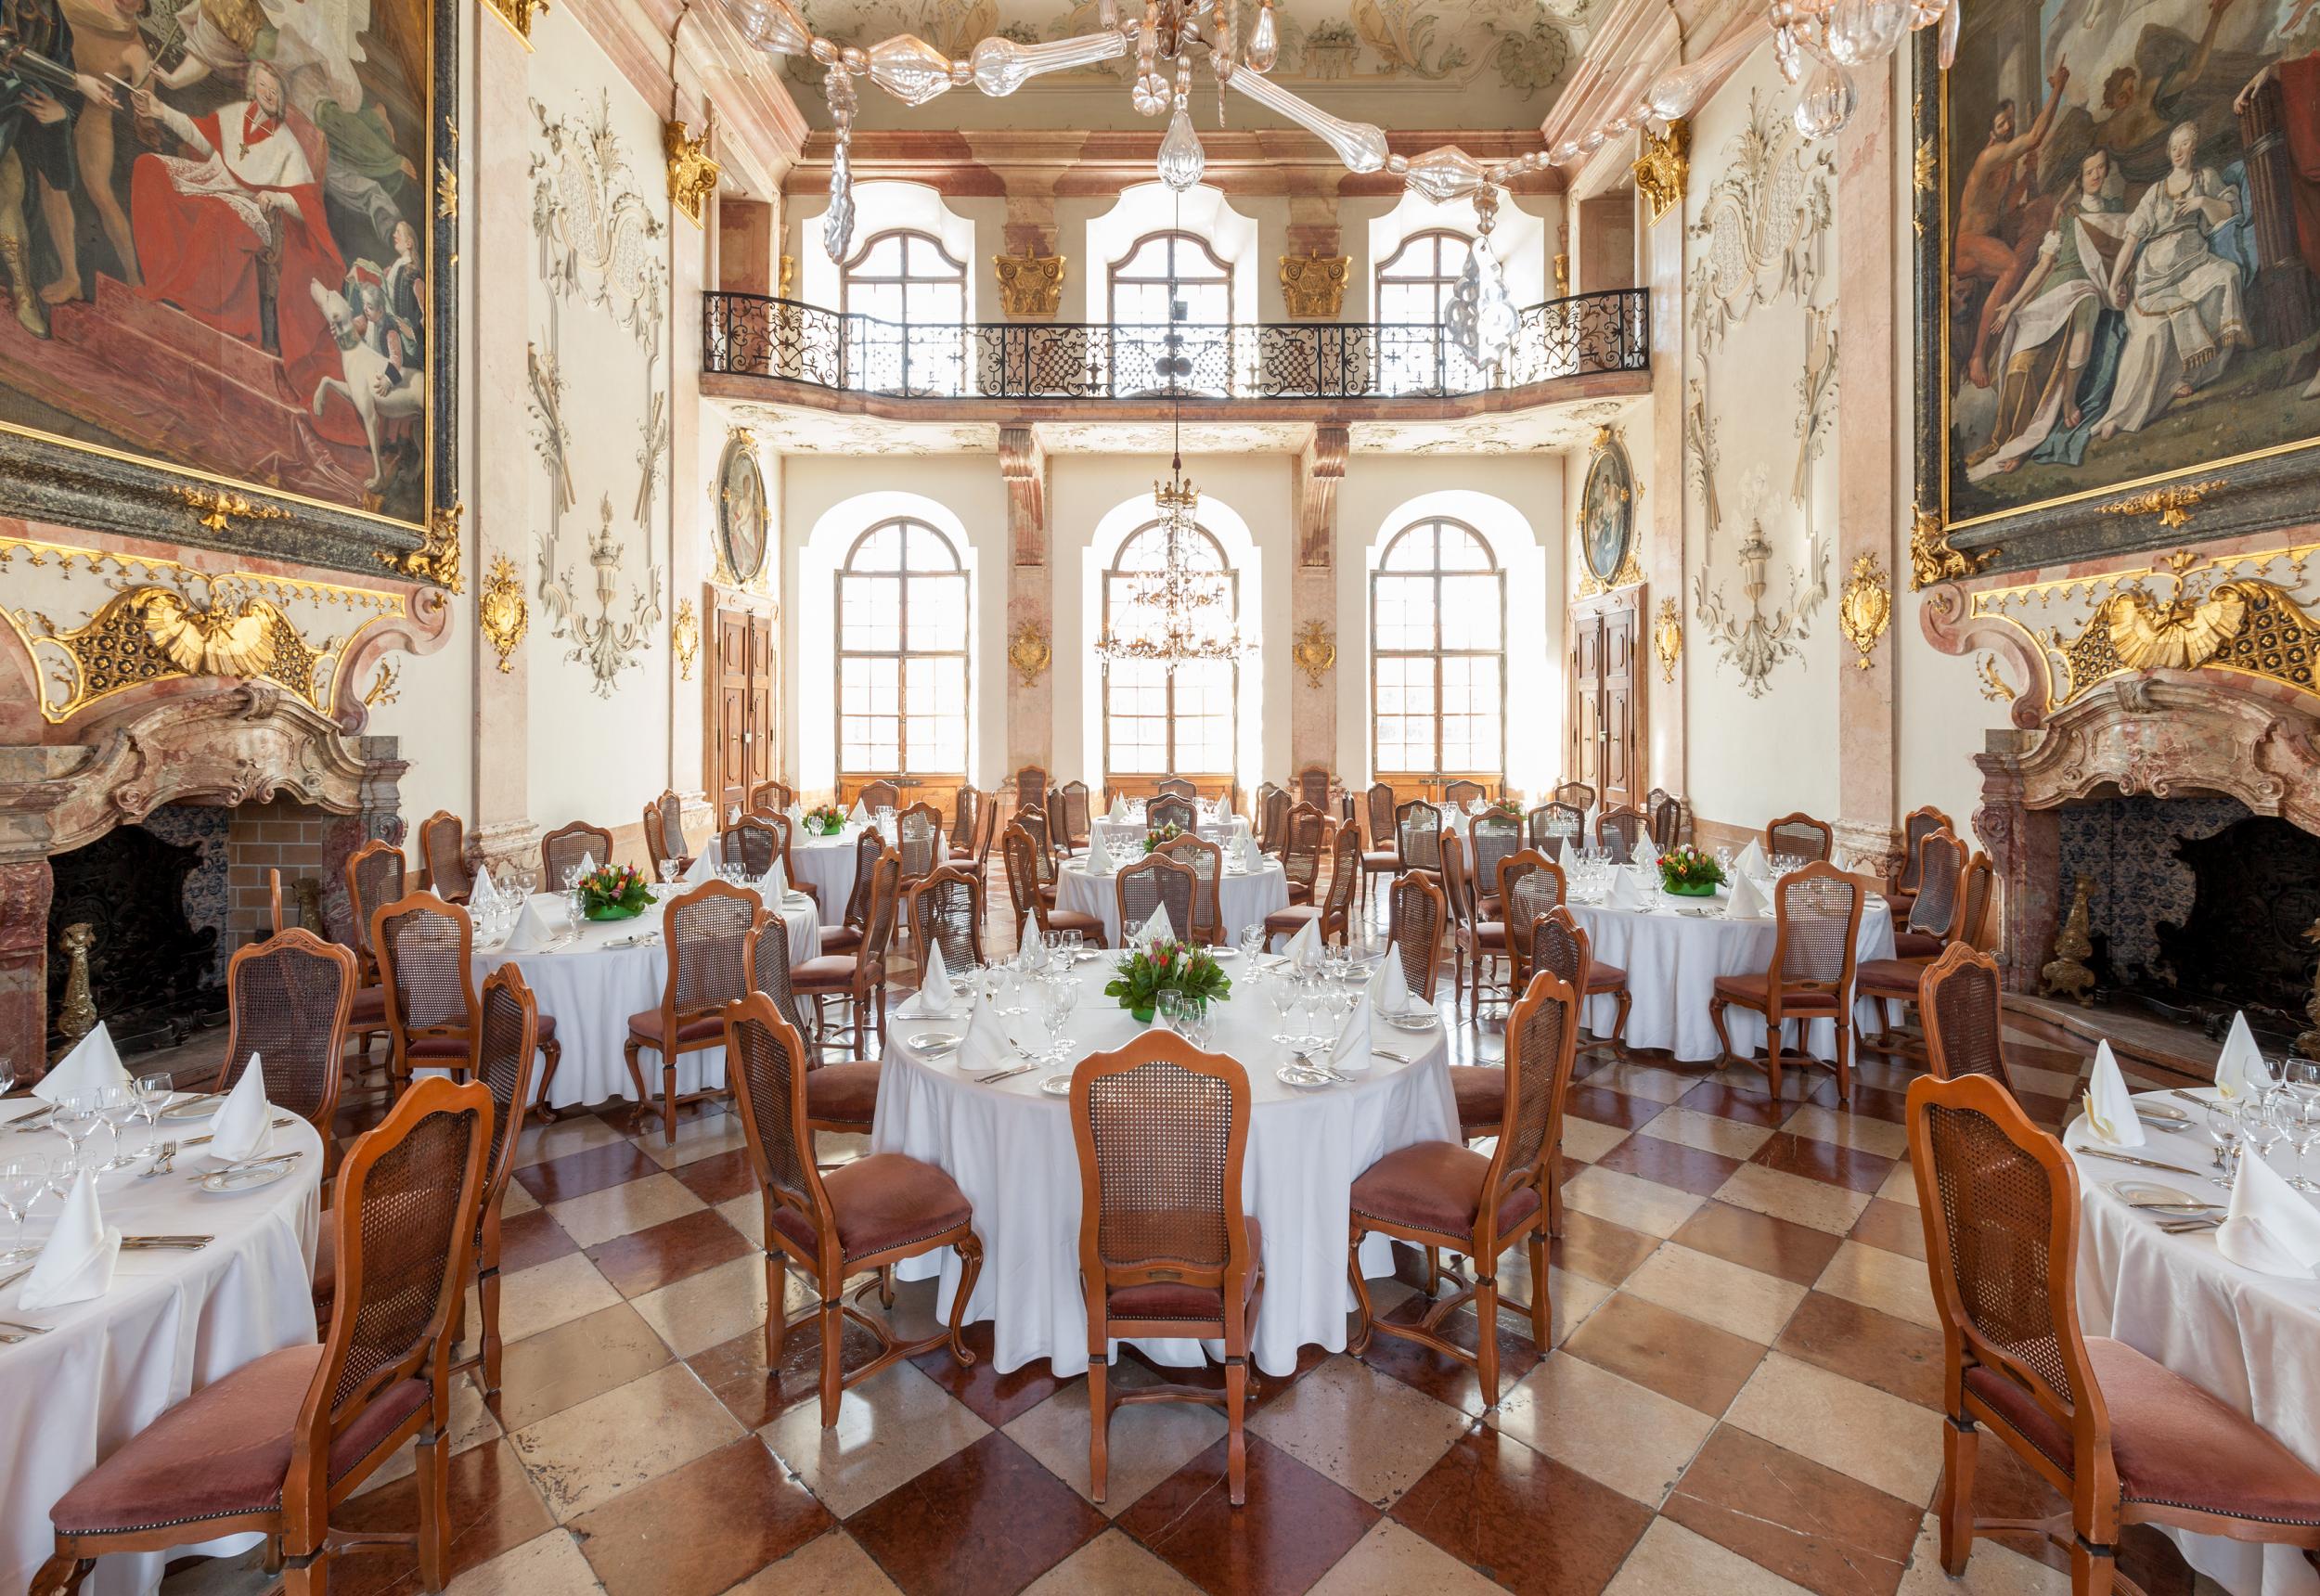 The grandiose Hotel Schloss Leopoldskron dates back to the 18th-century